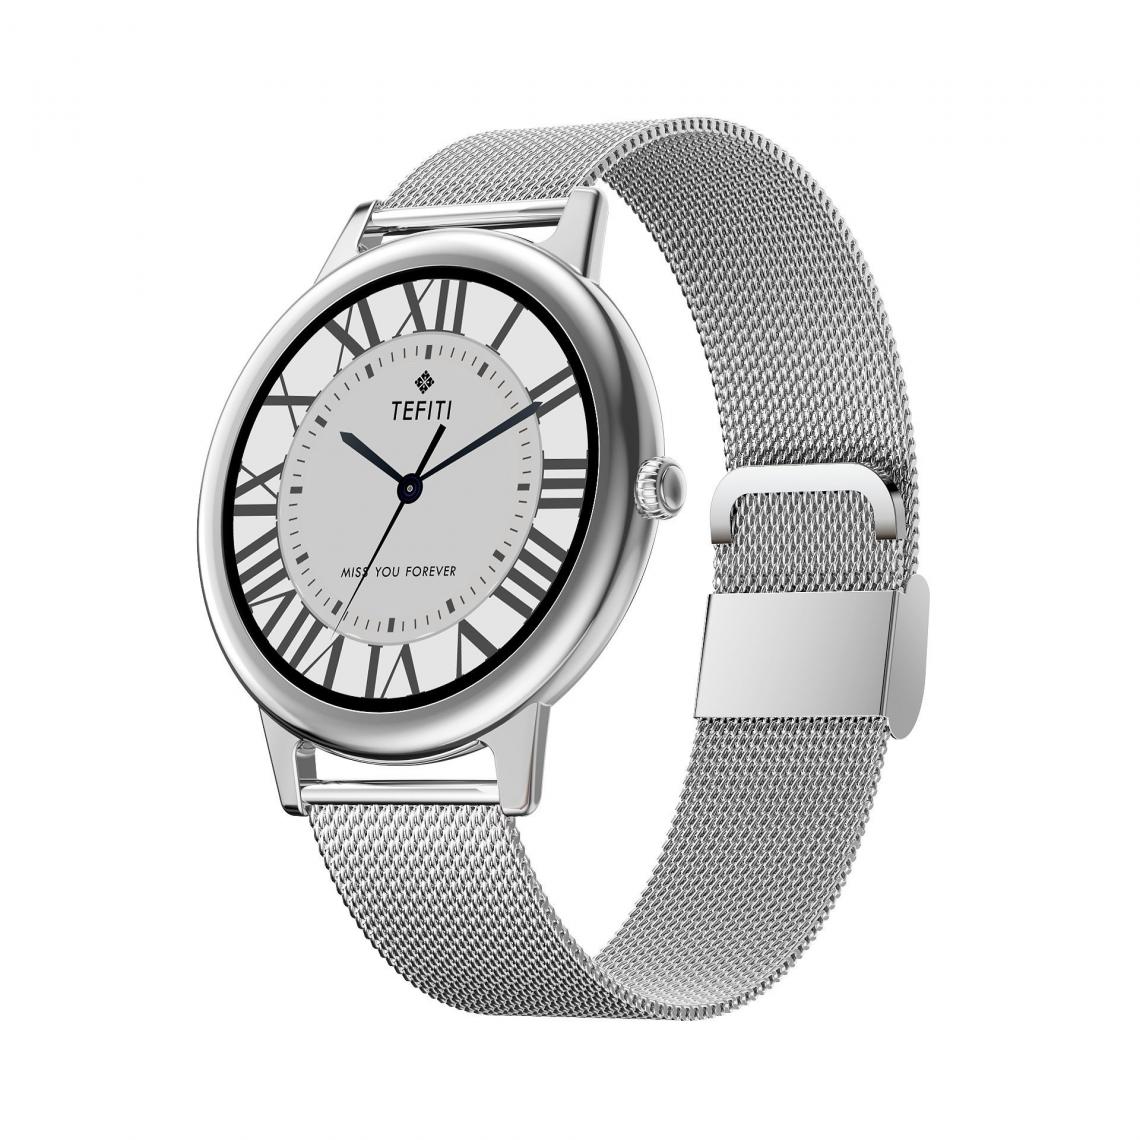 Chronotech Montres - Chronus Smart Watches for Men Women Full Touch Screen Ip67 Waterproof for Android and iOS Phones(silver) - Montre connectée